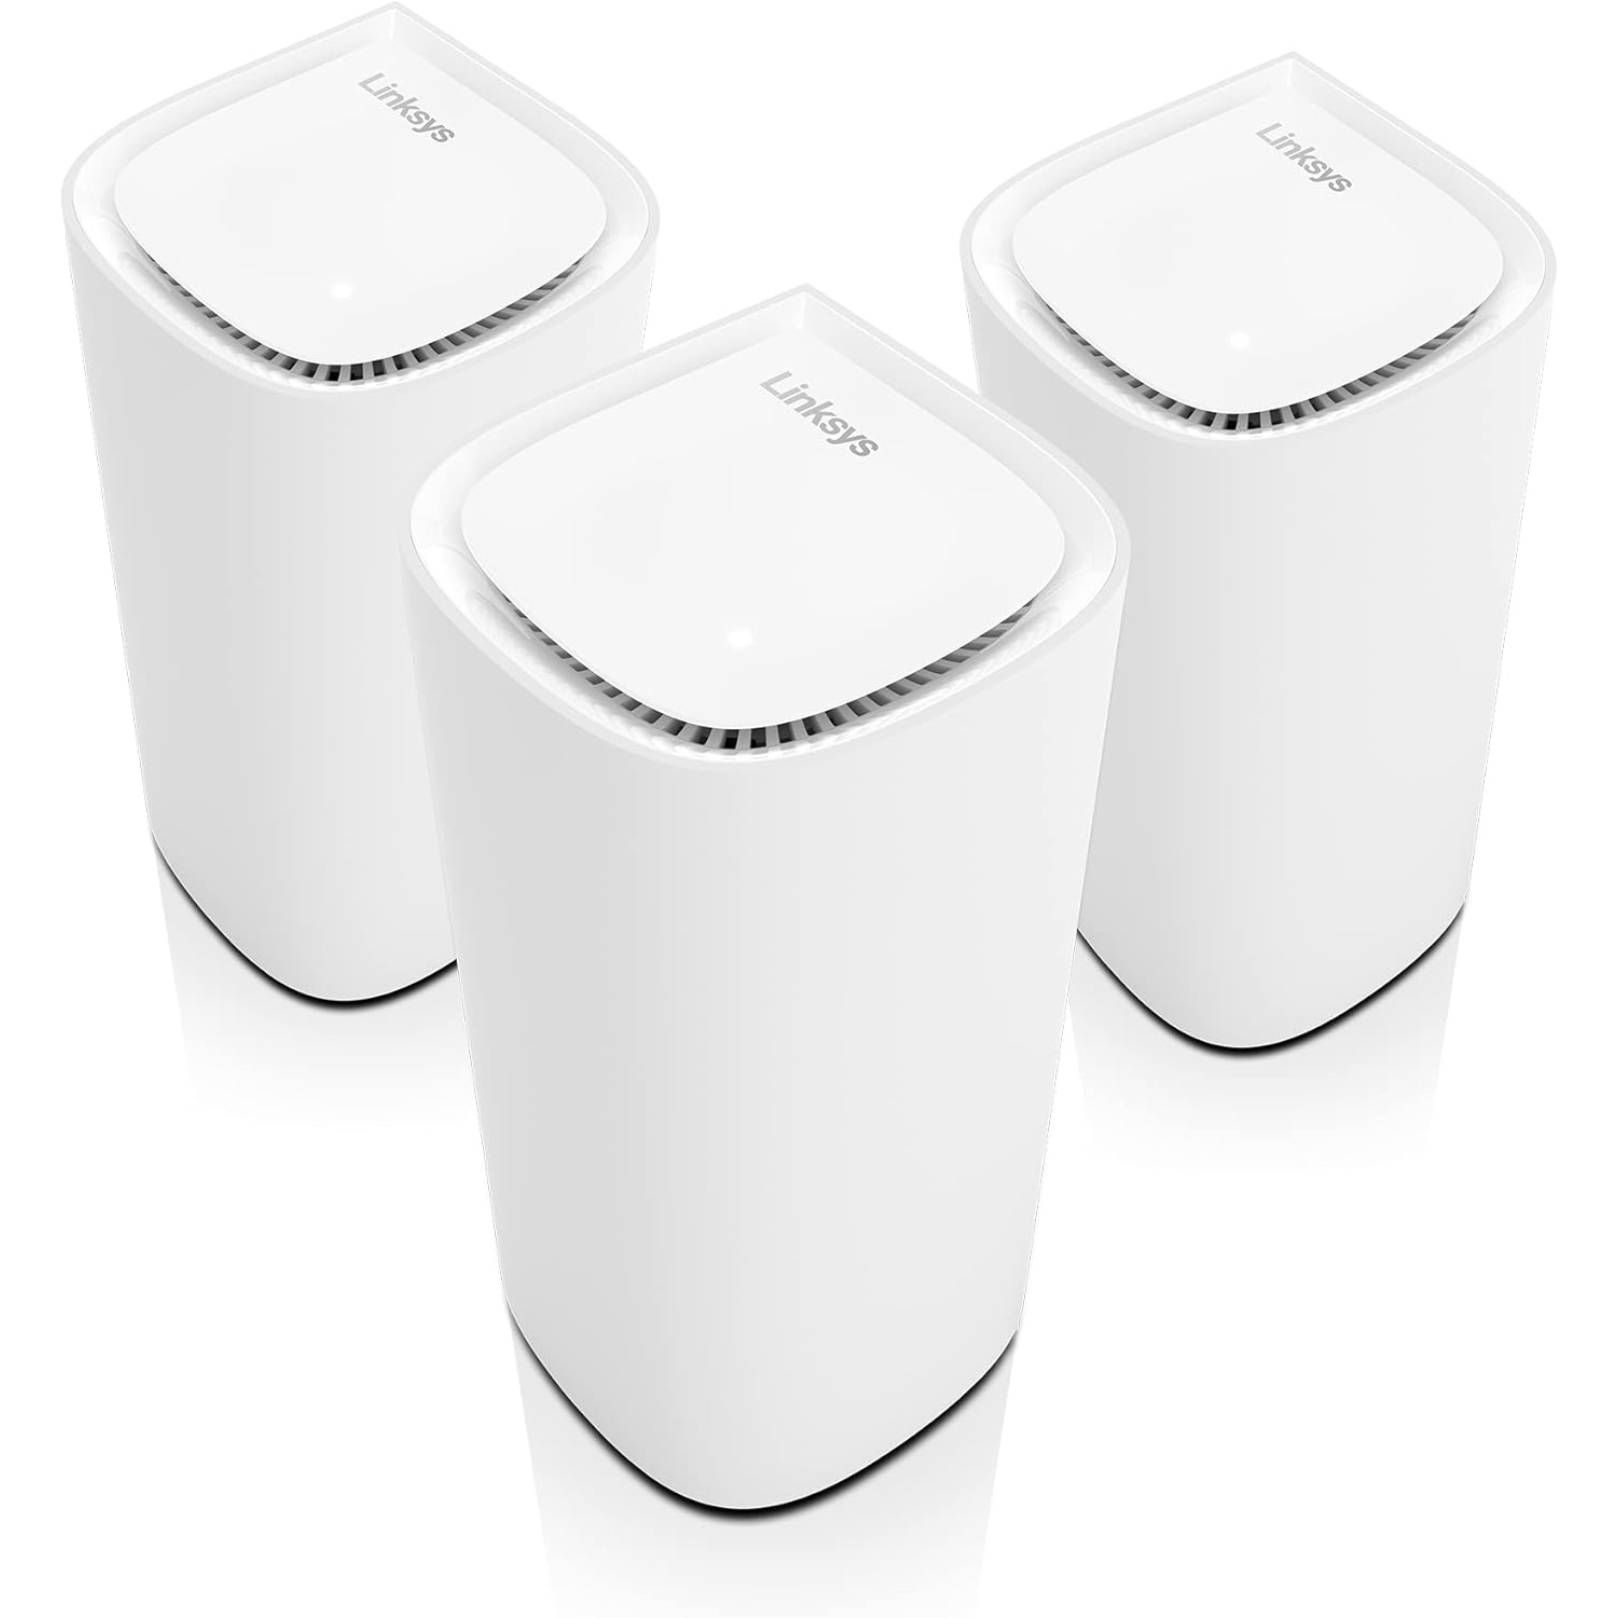 Linksys Velop Pro WiFi 6E Mesh Router with 9000 sq ft coverage 